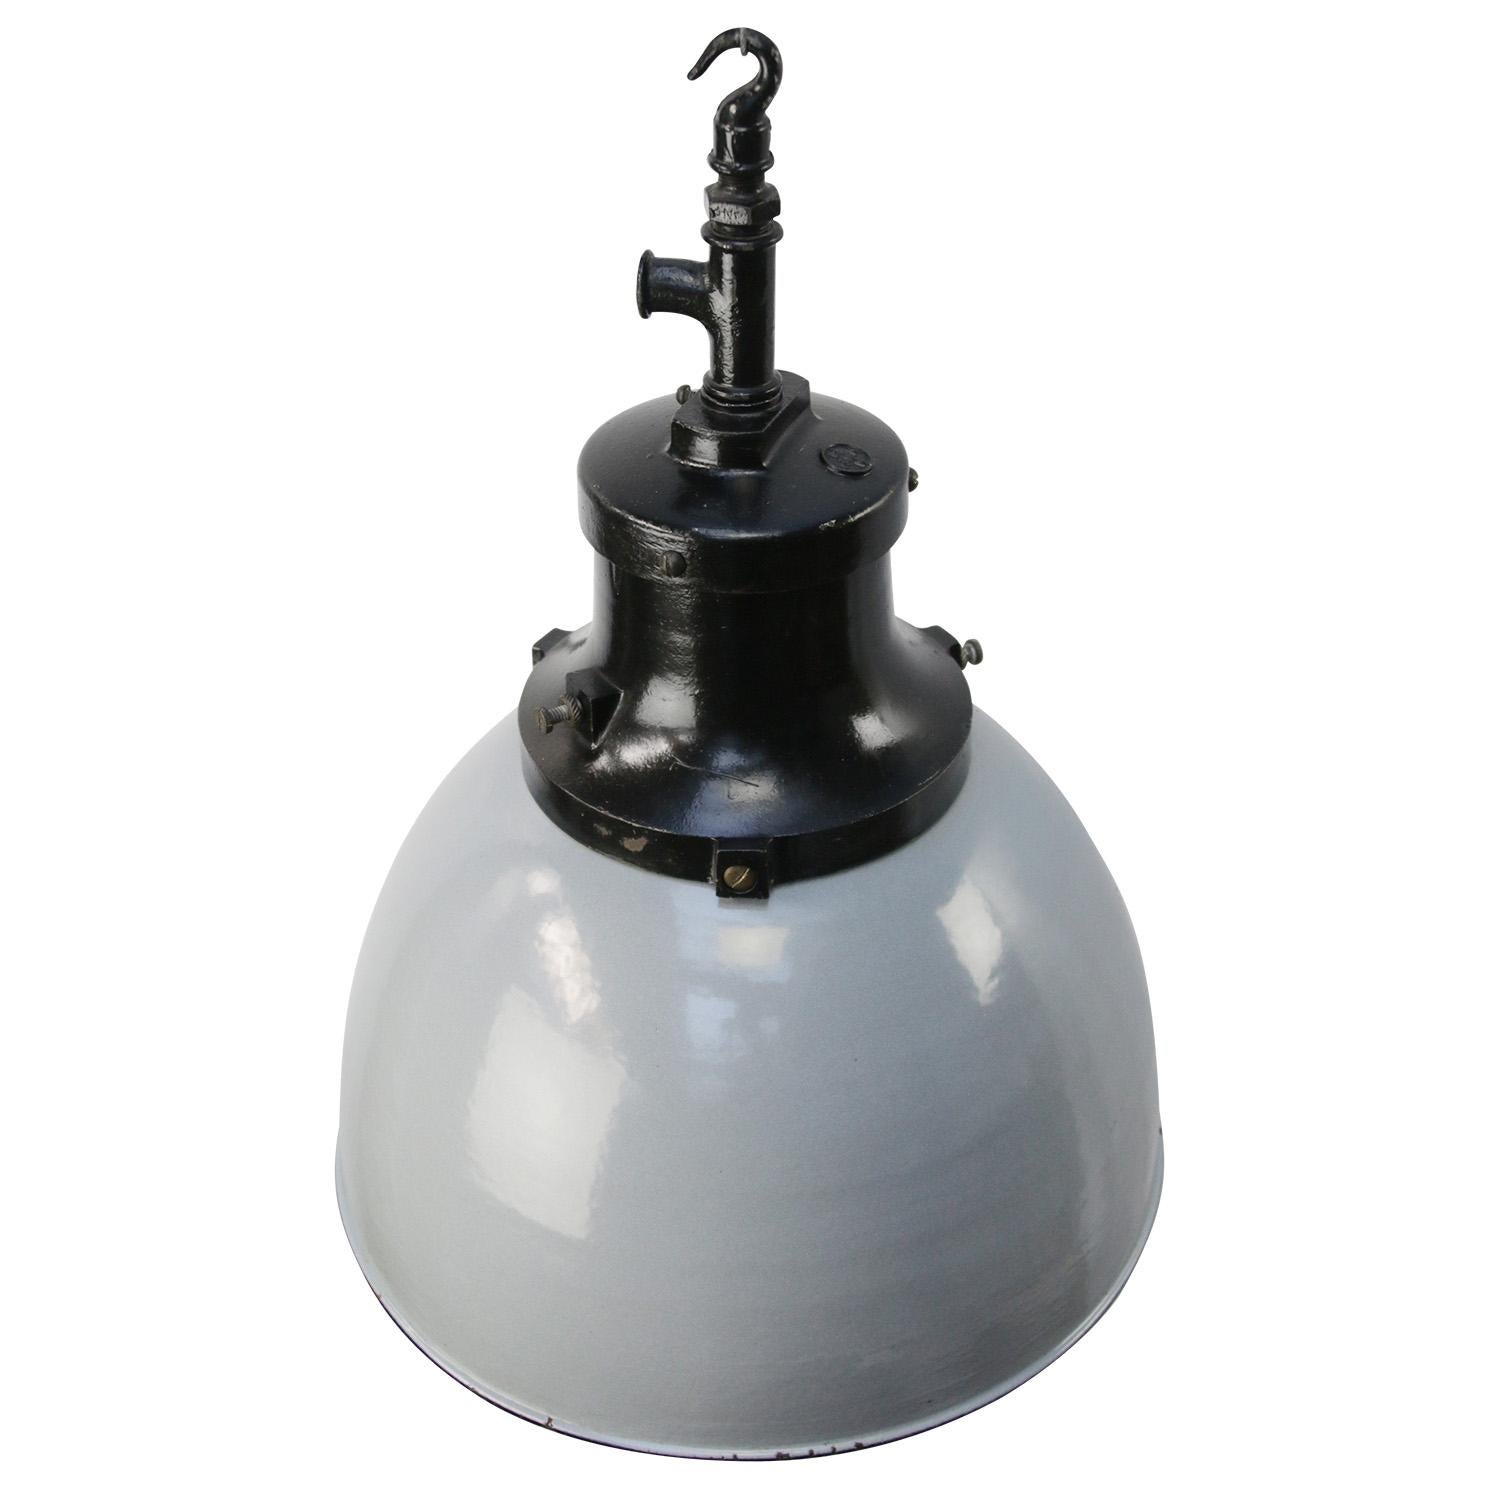 Rare and old factory lamp by HWK
Grey enamel with black cast iron top
White interior

Weight: 5.40 kg / 11.9 lb

Priced per individual item. All lamps have been made suitable by international standards for incandescent light bulbs,